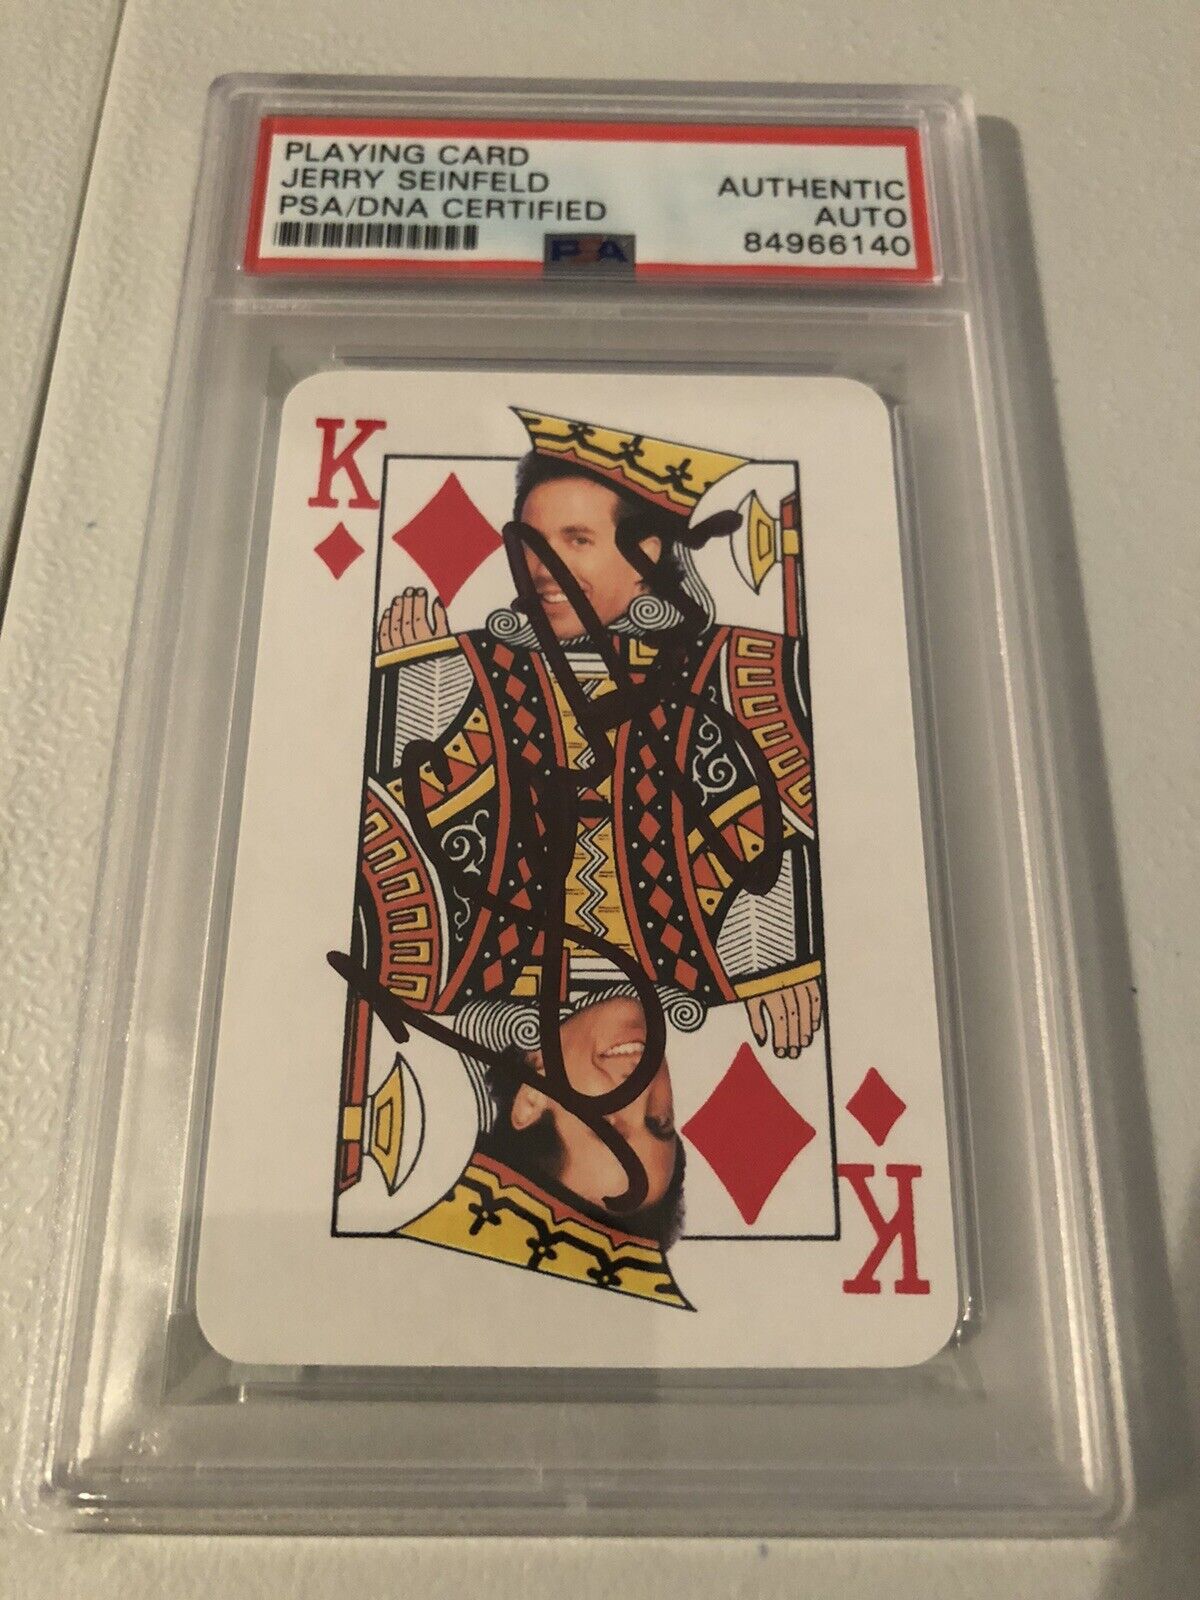 Seinfeld Playing Cards Jerry Seinfeld Signed PSA Authentic Auto 